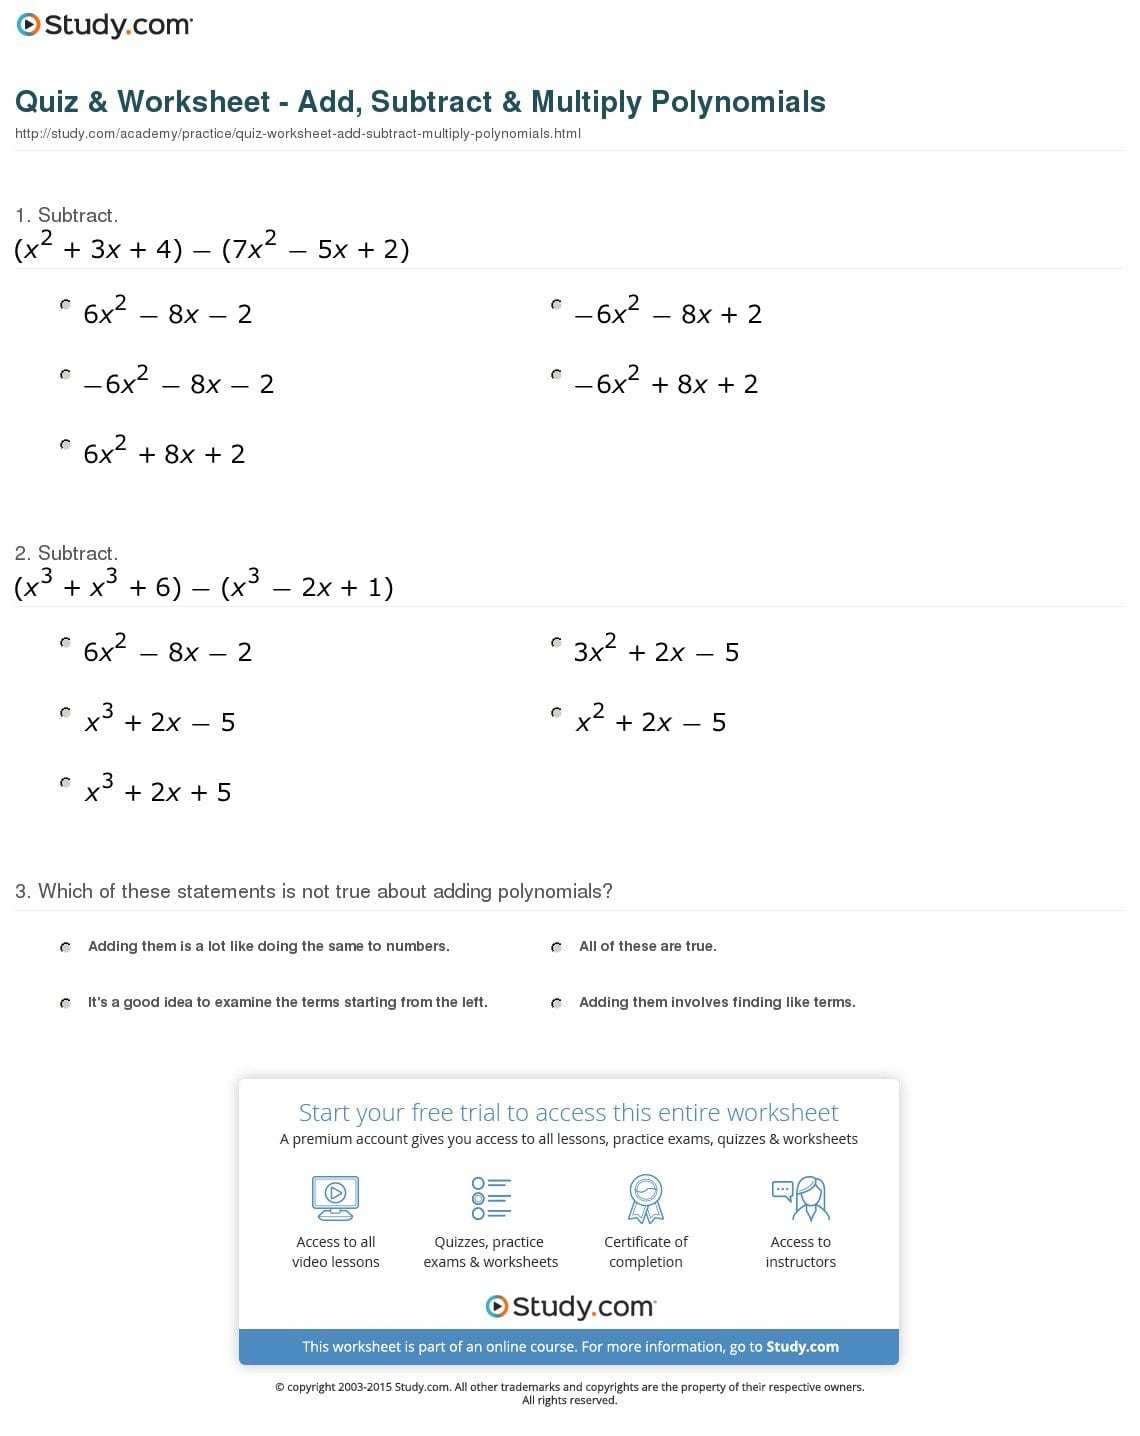 Quiz  Worksheet  Add Subtract  Multiply Polynomials  Study For Adding And Subtracting Polynomials Worksheet